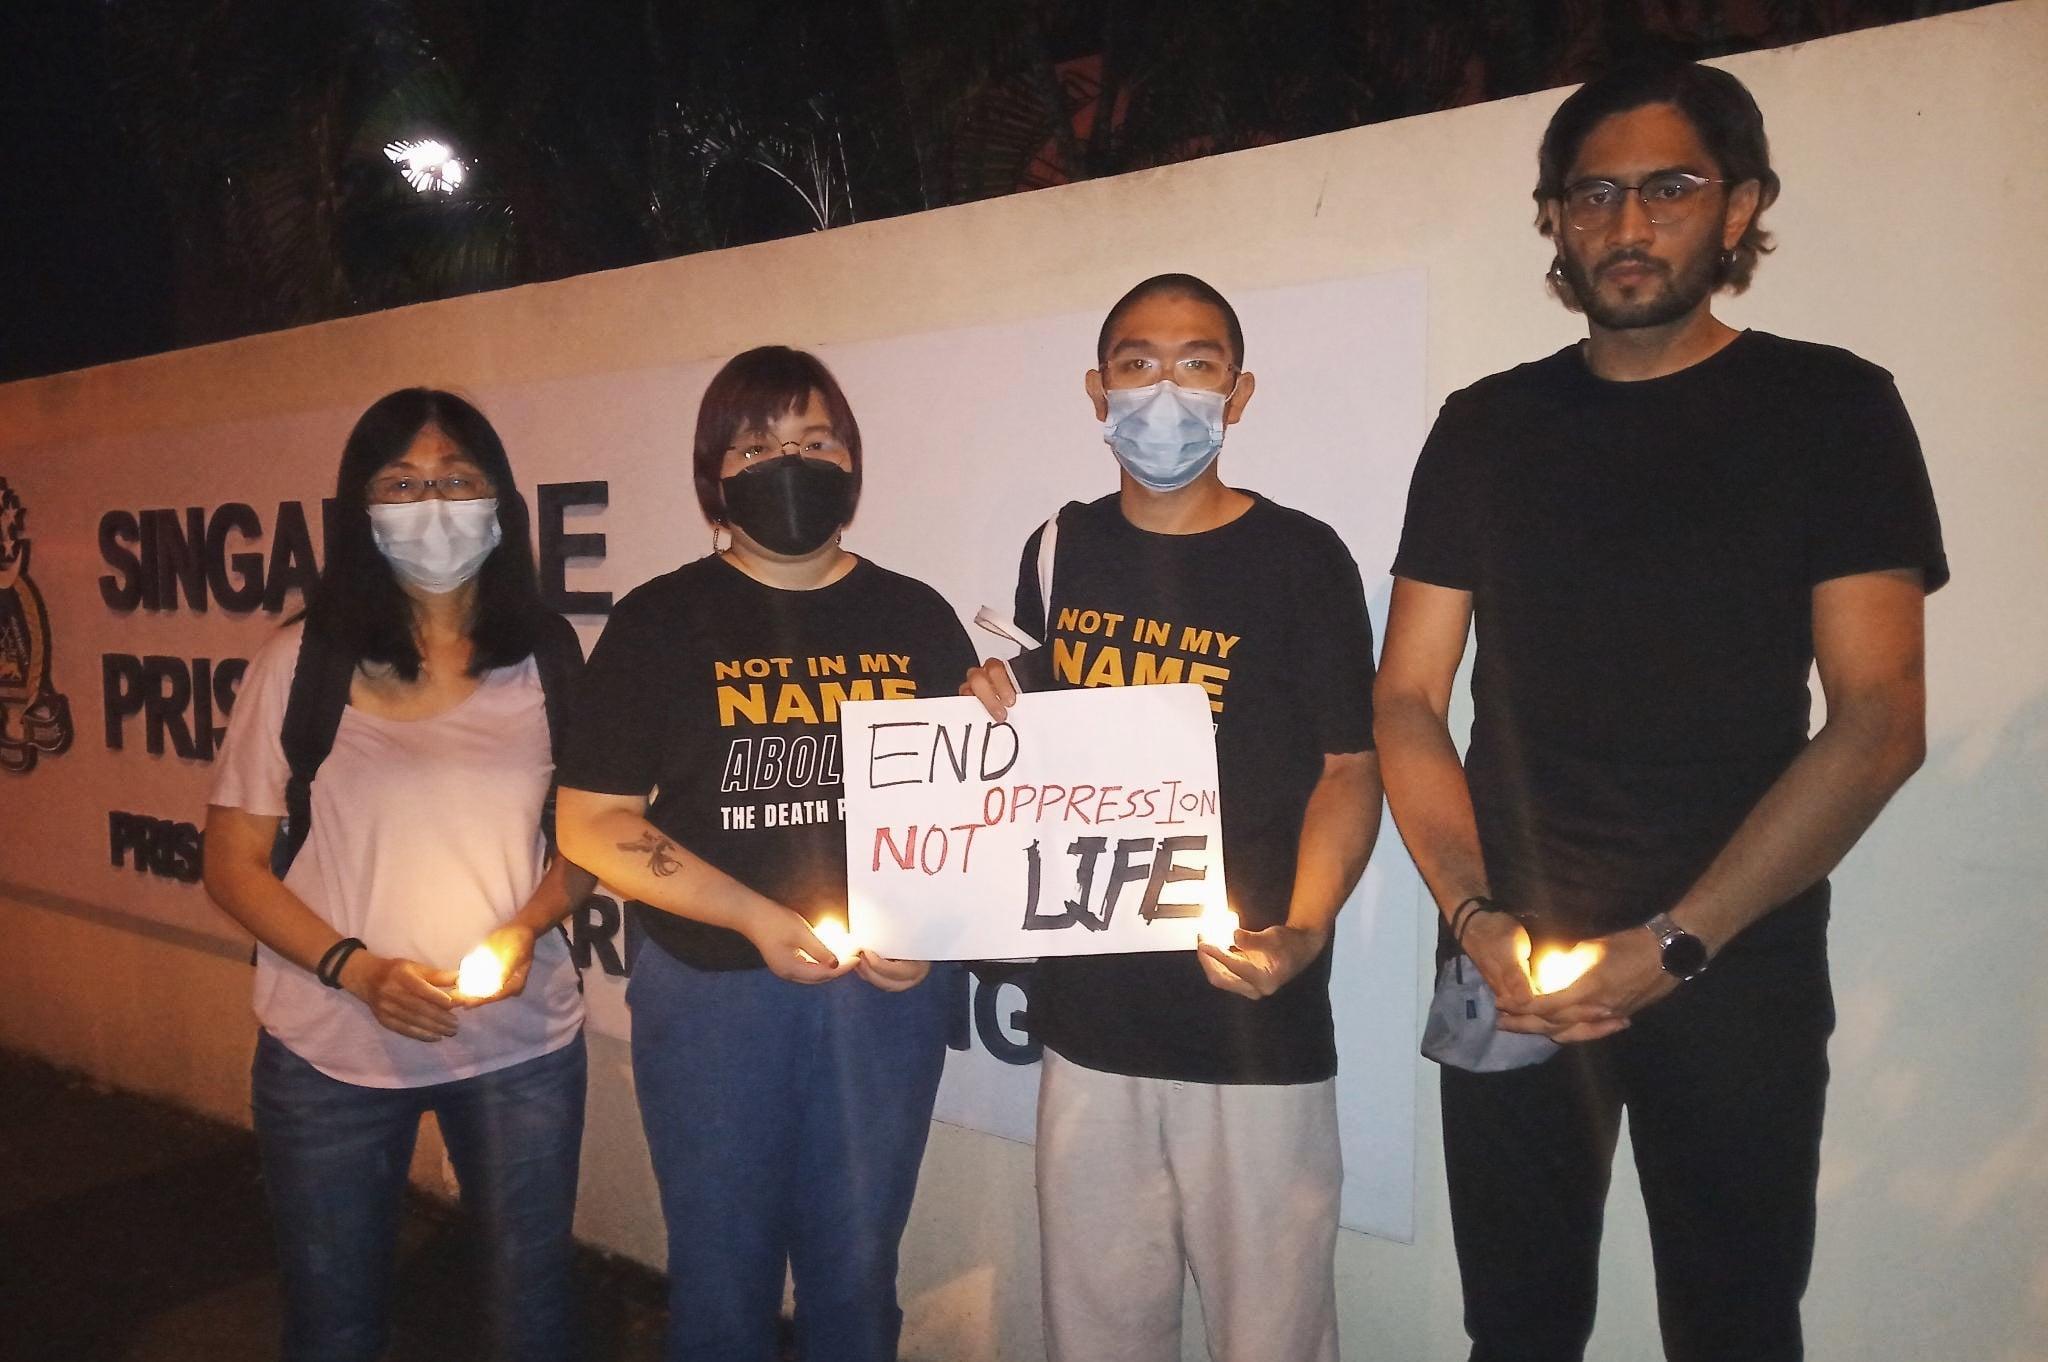 Activists Kirsten Han and Rocky Howe (centre) take part in a peaceful, four-person vigil outside Singapore's Changi prison on April 25. The photo later sparked a police investigation into possible offences under the Public Order Act. Photo: Facebook